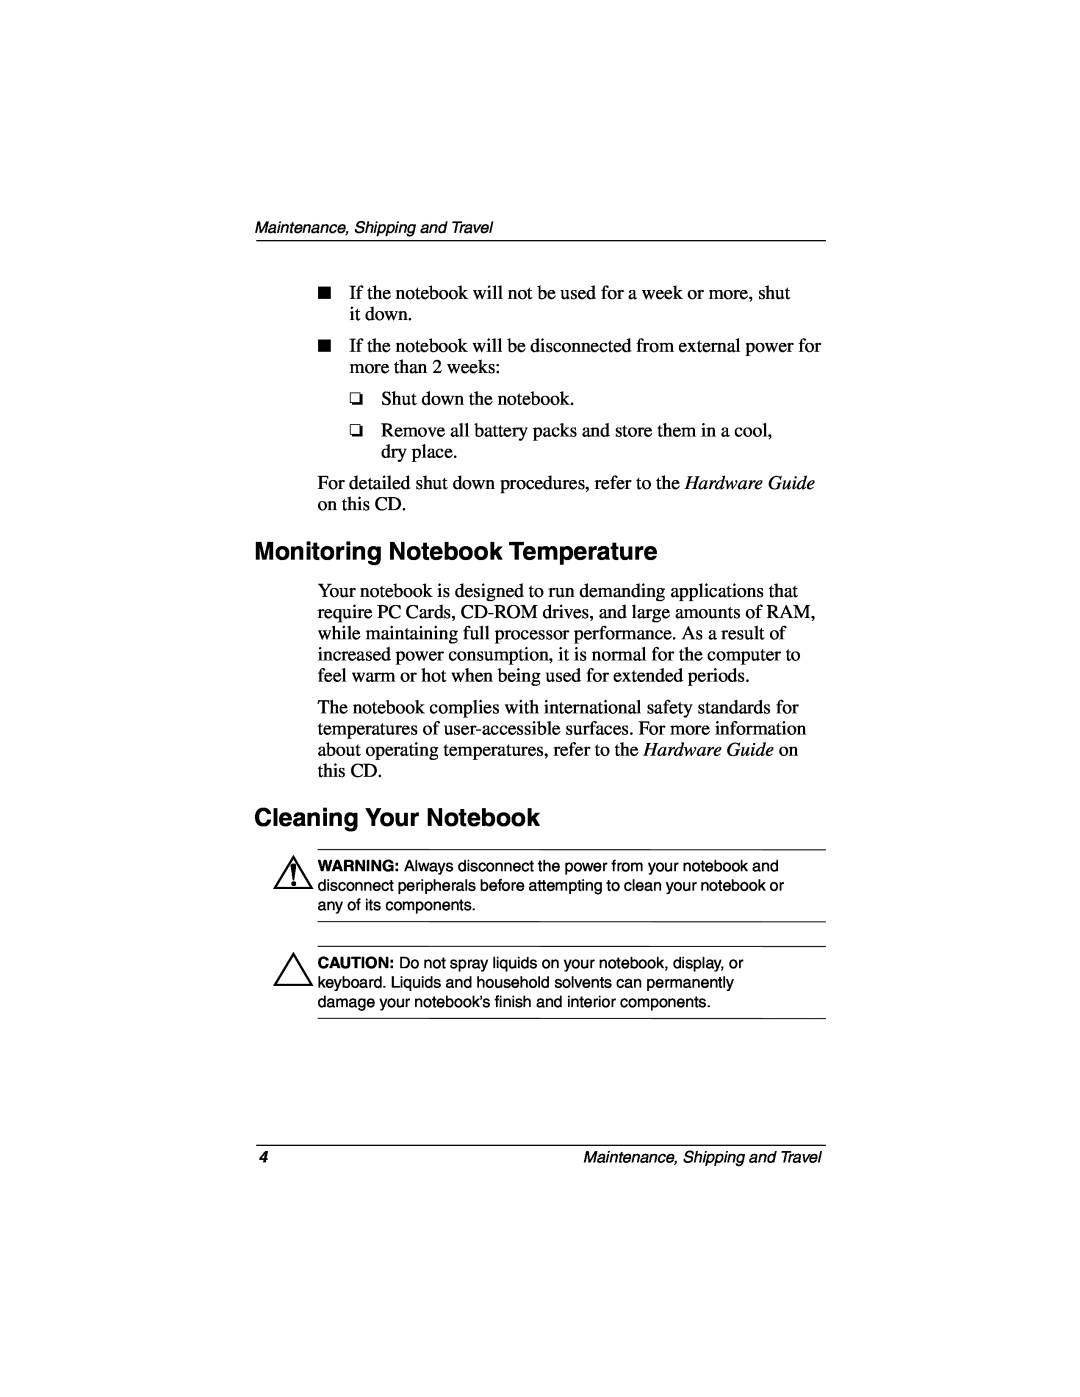 Compaq 267637-001 manual Monitoring Notebook Temperature, Cleaning Your Notebook 